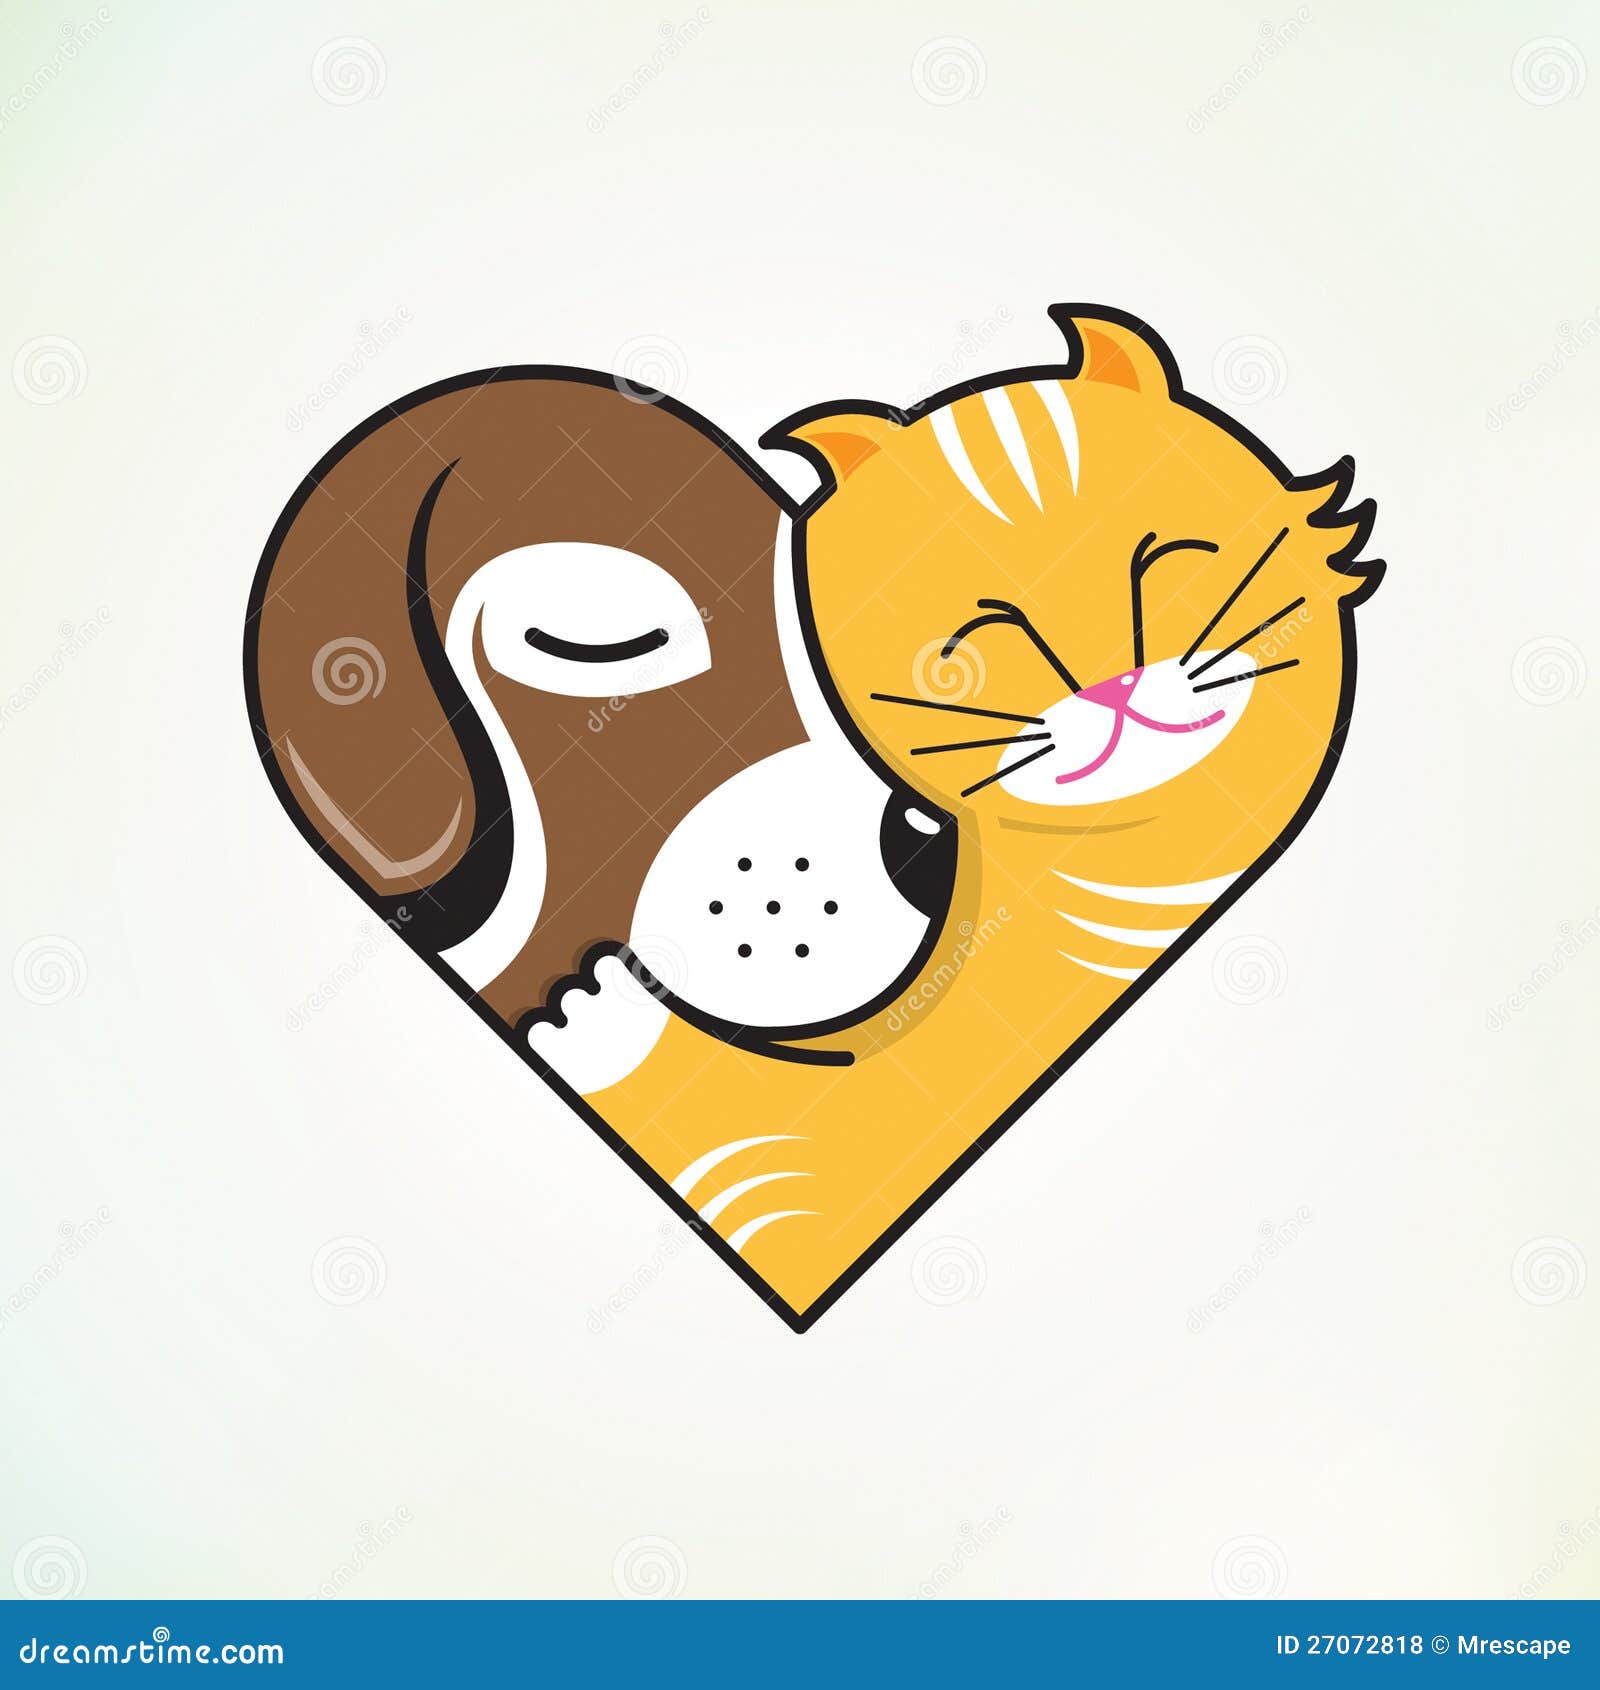 dog lover clipart - photo #13